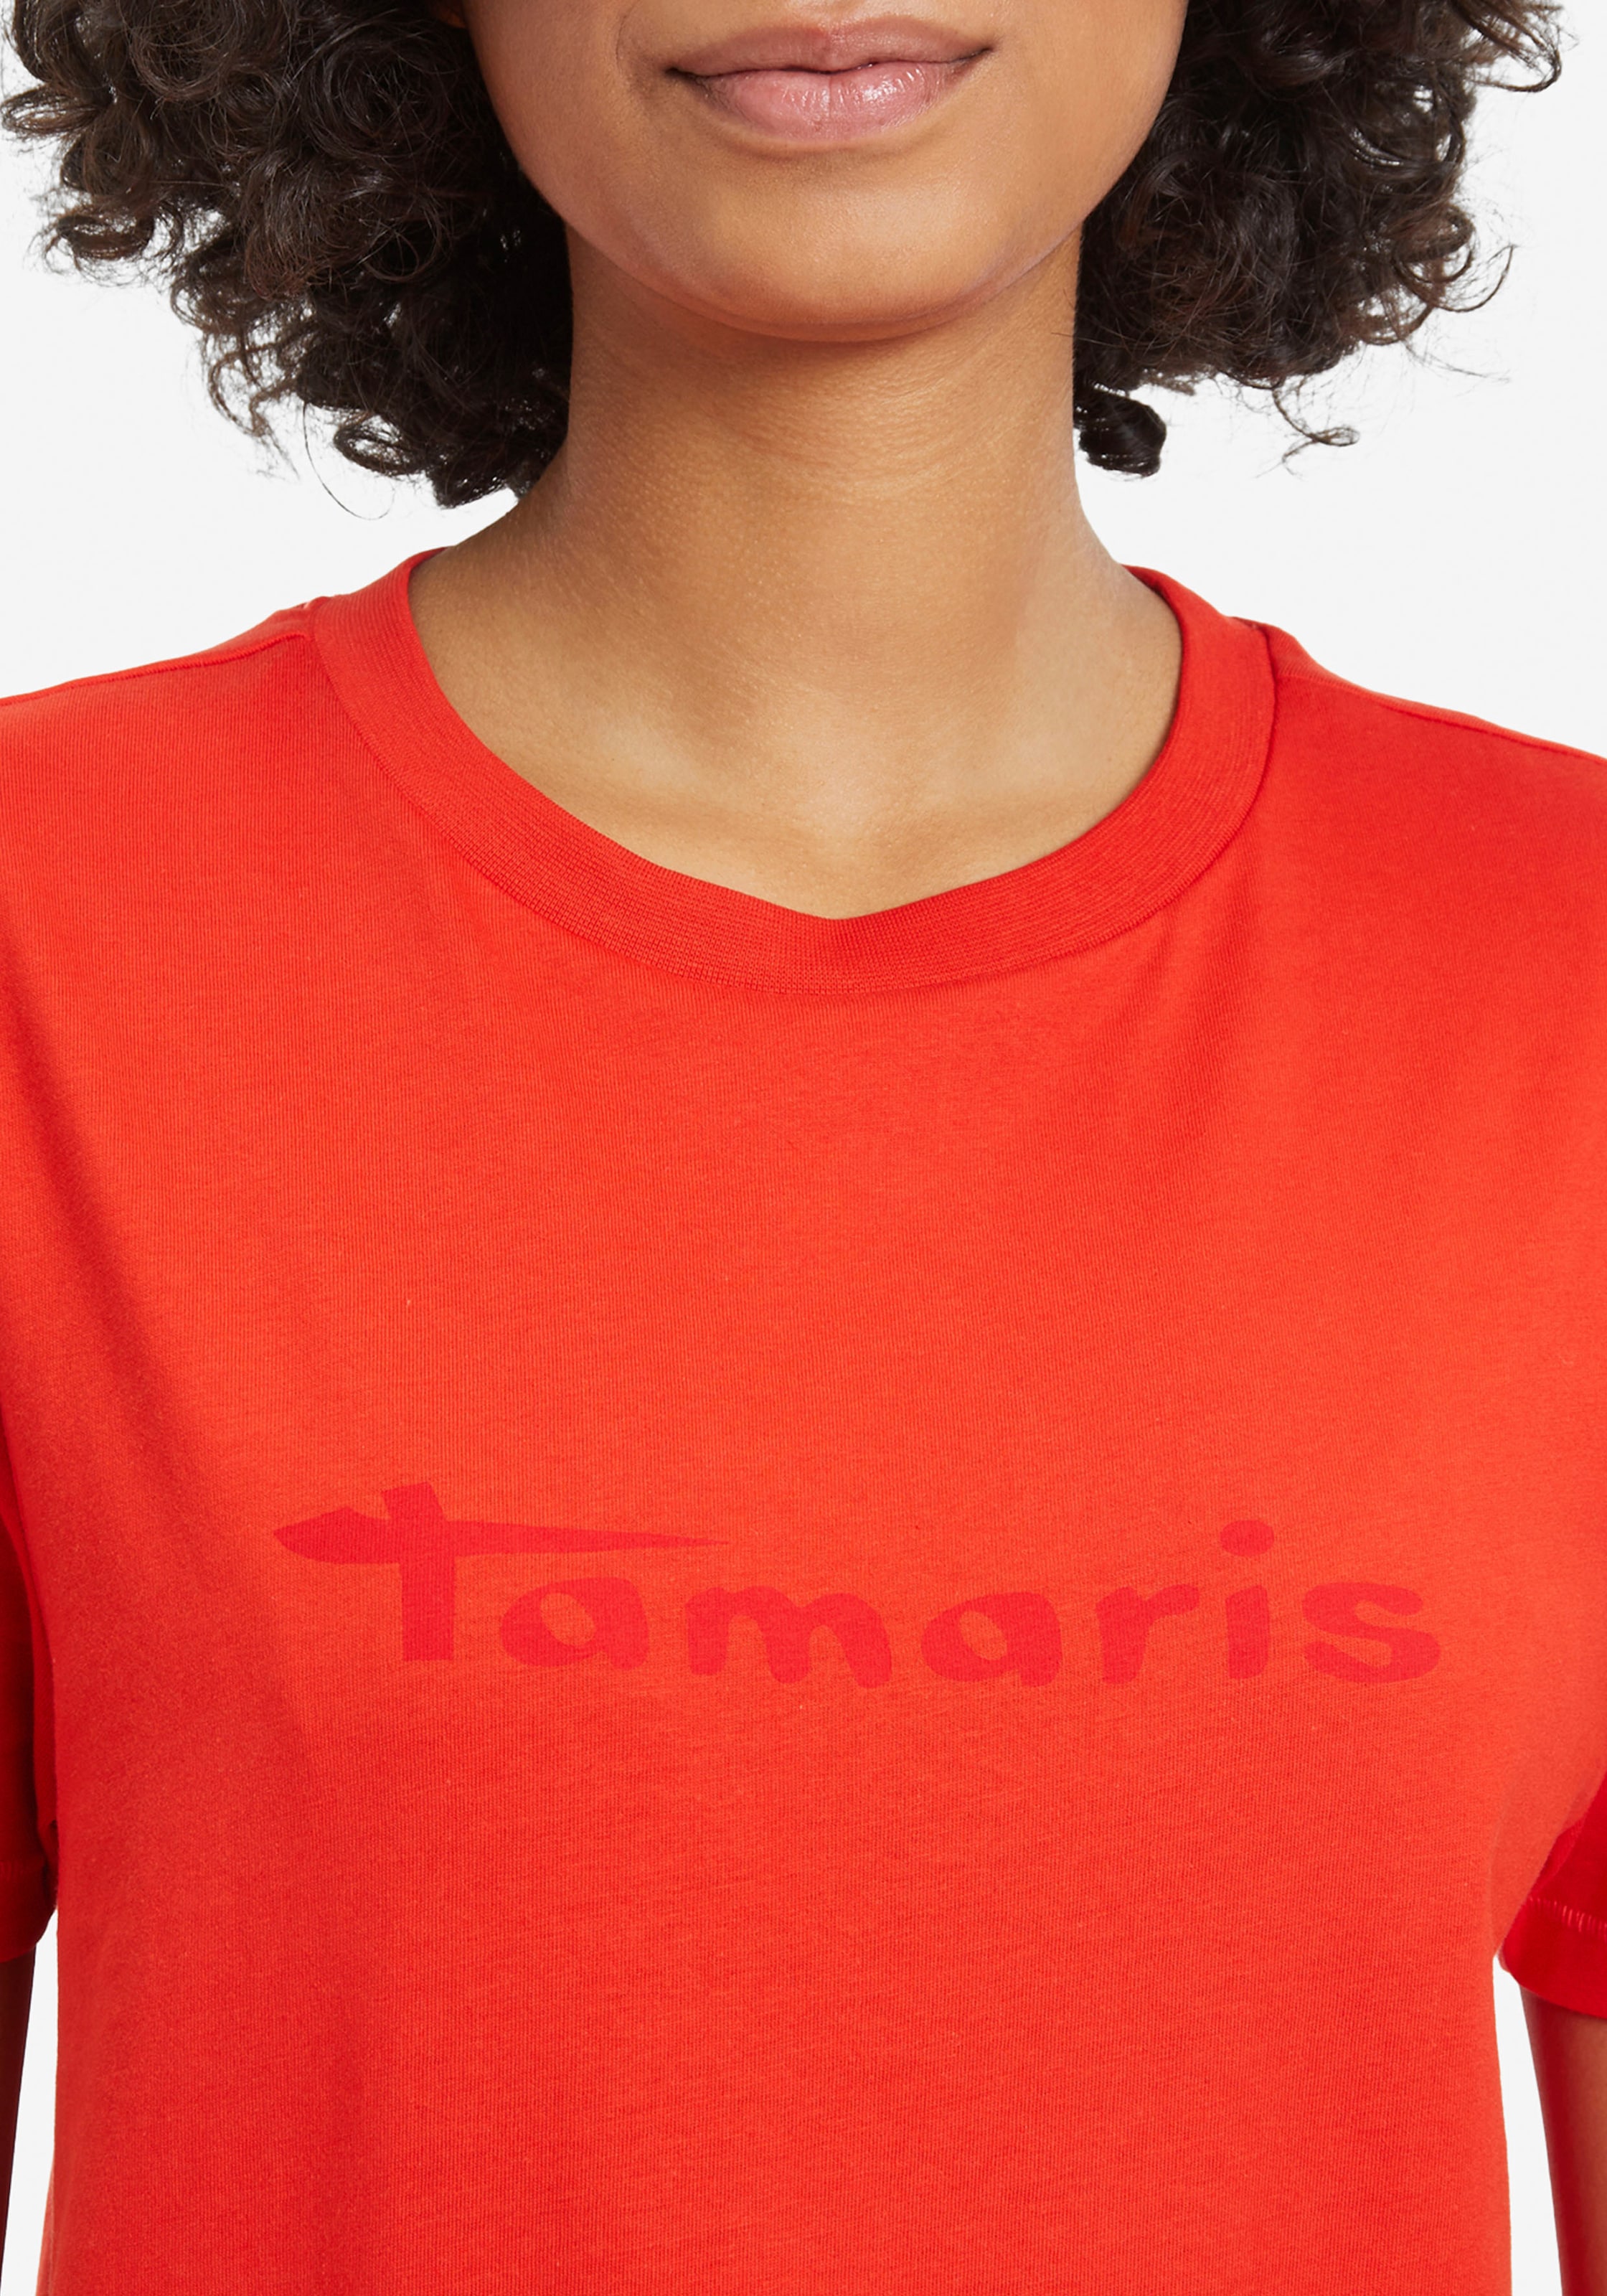 in YOU | TAMARIS Cranberry T-Shirt Rot, ABOUT